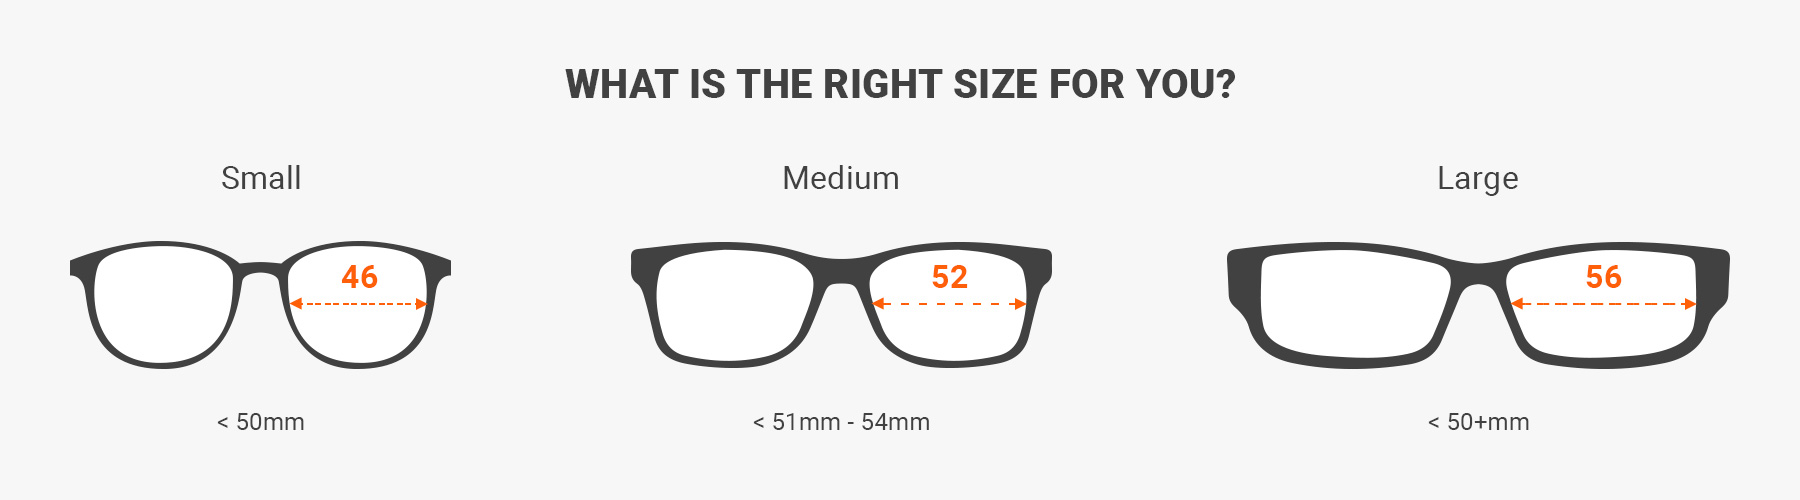 how-to-measure-sunglasses-size-chart-my-xxx-hot-girl